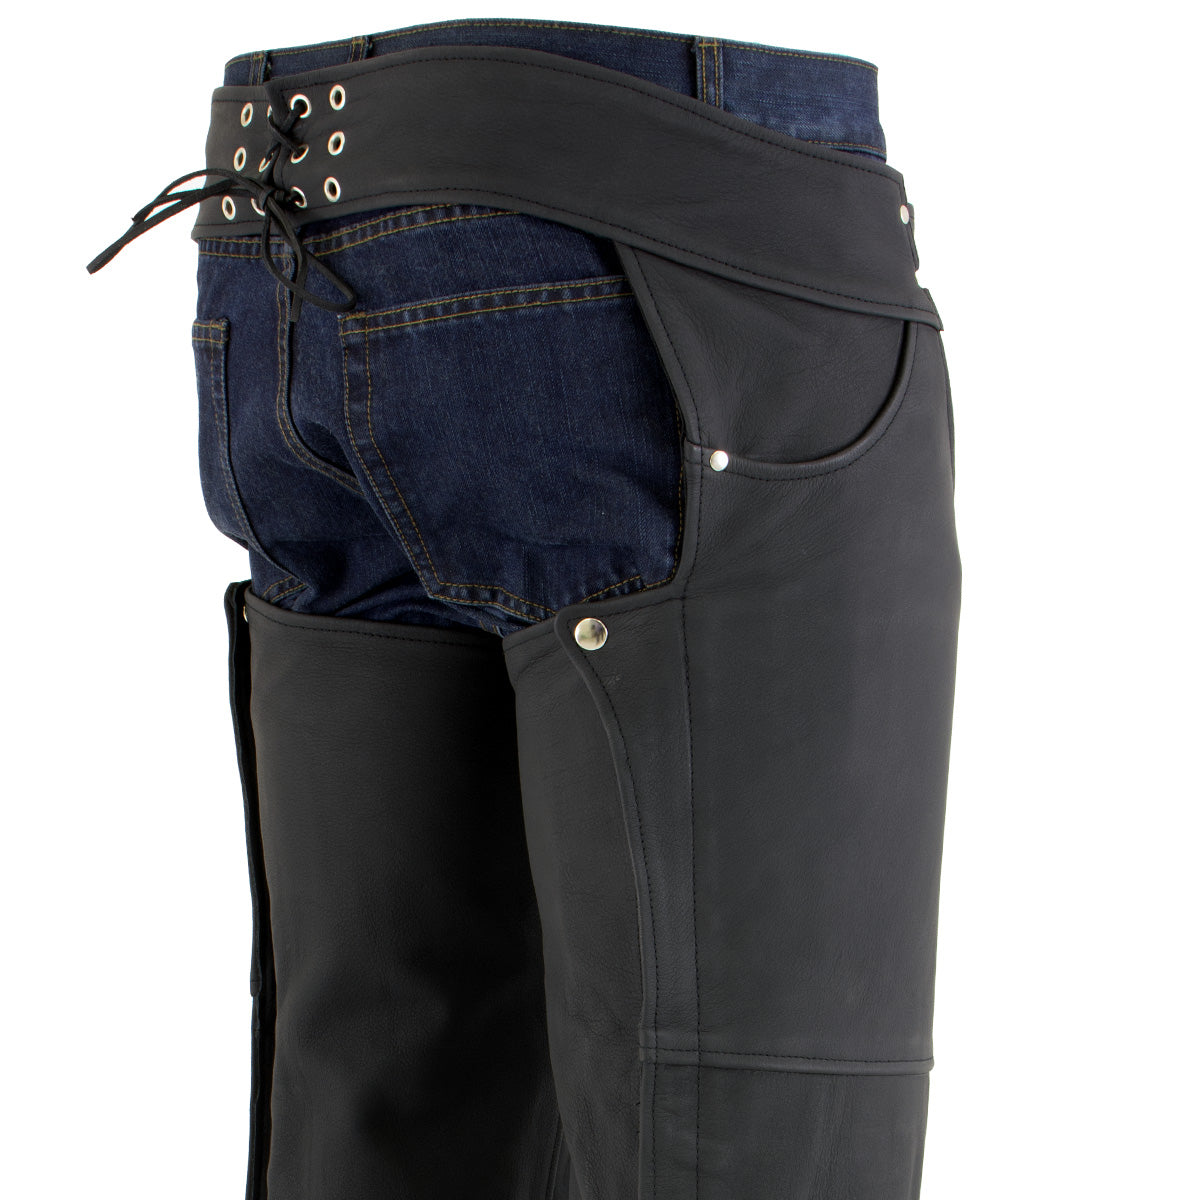 Xelement XS15000 Men's 'Tedious' Flat Black Leather Motorcycle Biker Chaps with Jean Pockets